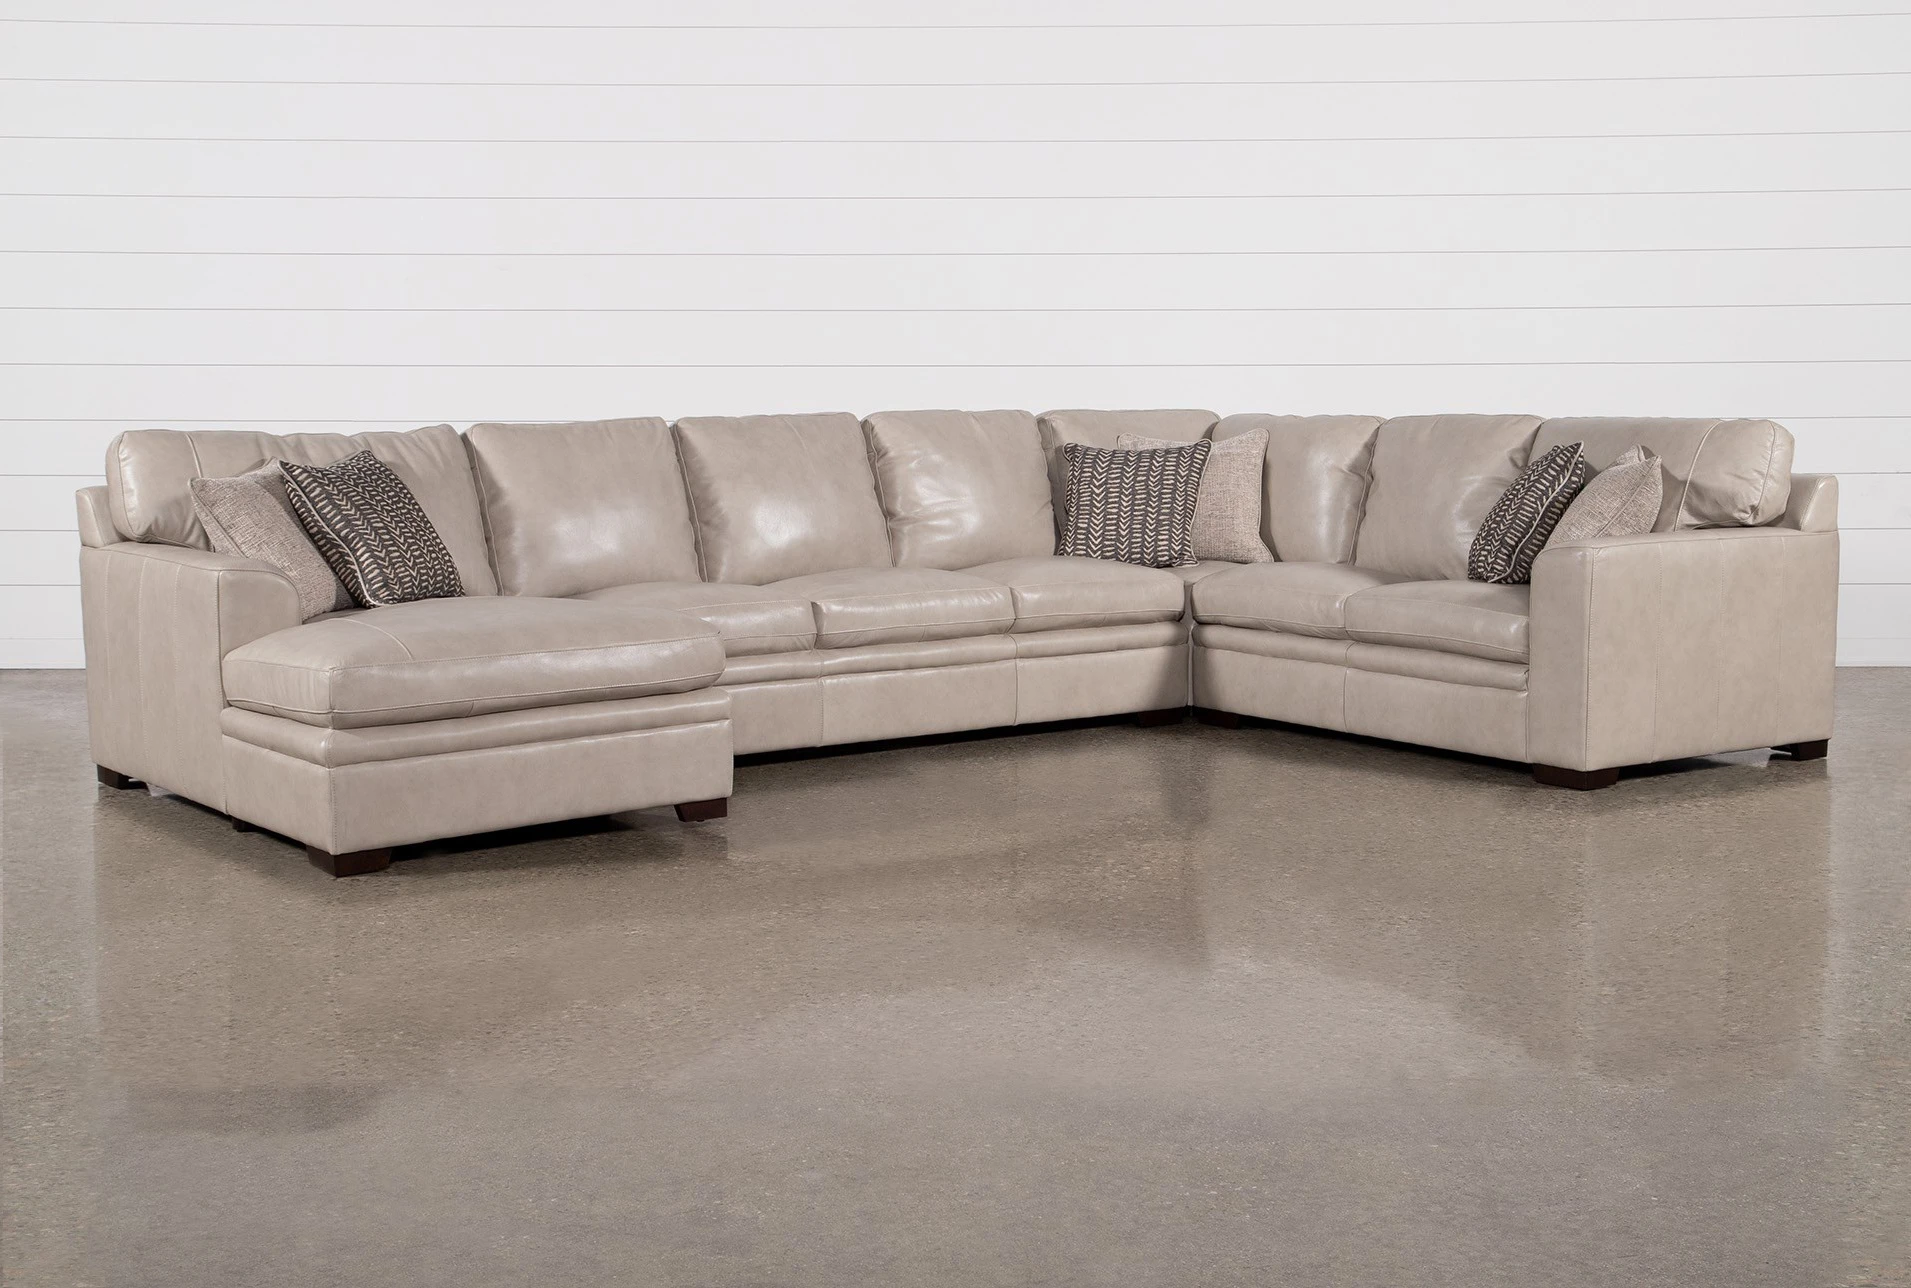 Greer Stone Leather 4 Piece 171, Leather Sofa Sectional With Chaise